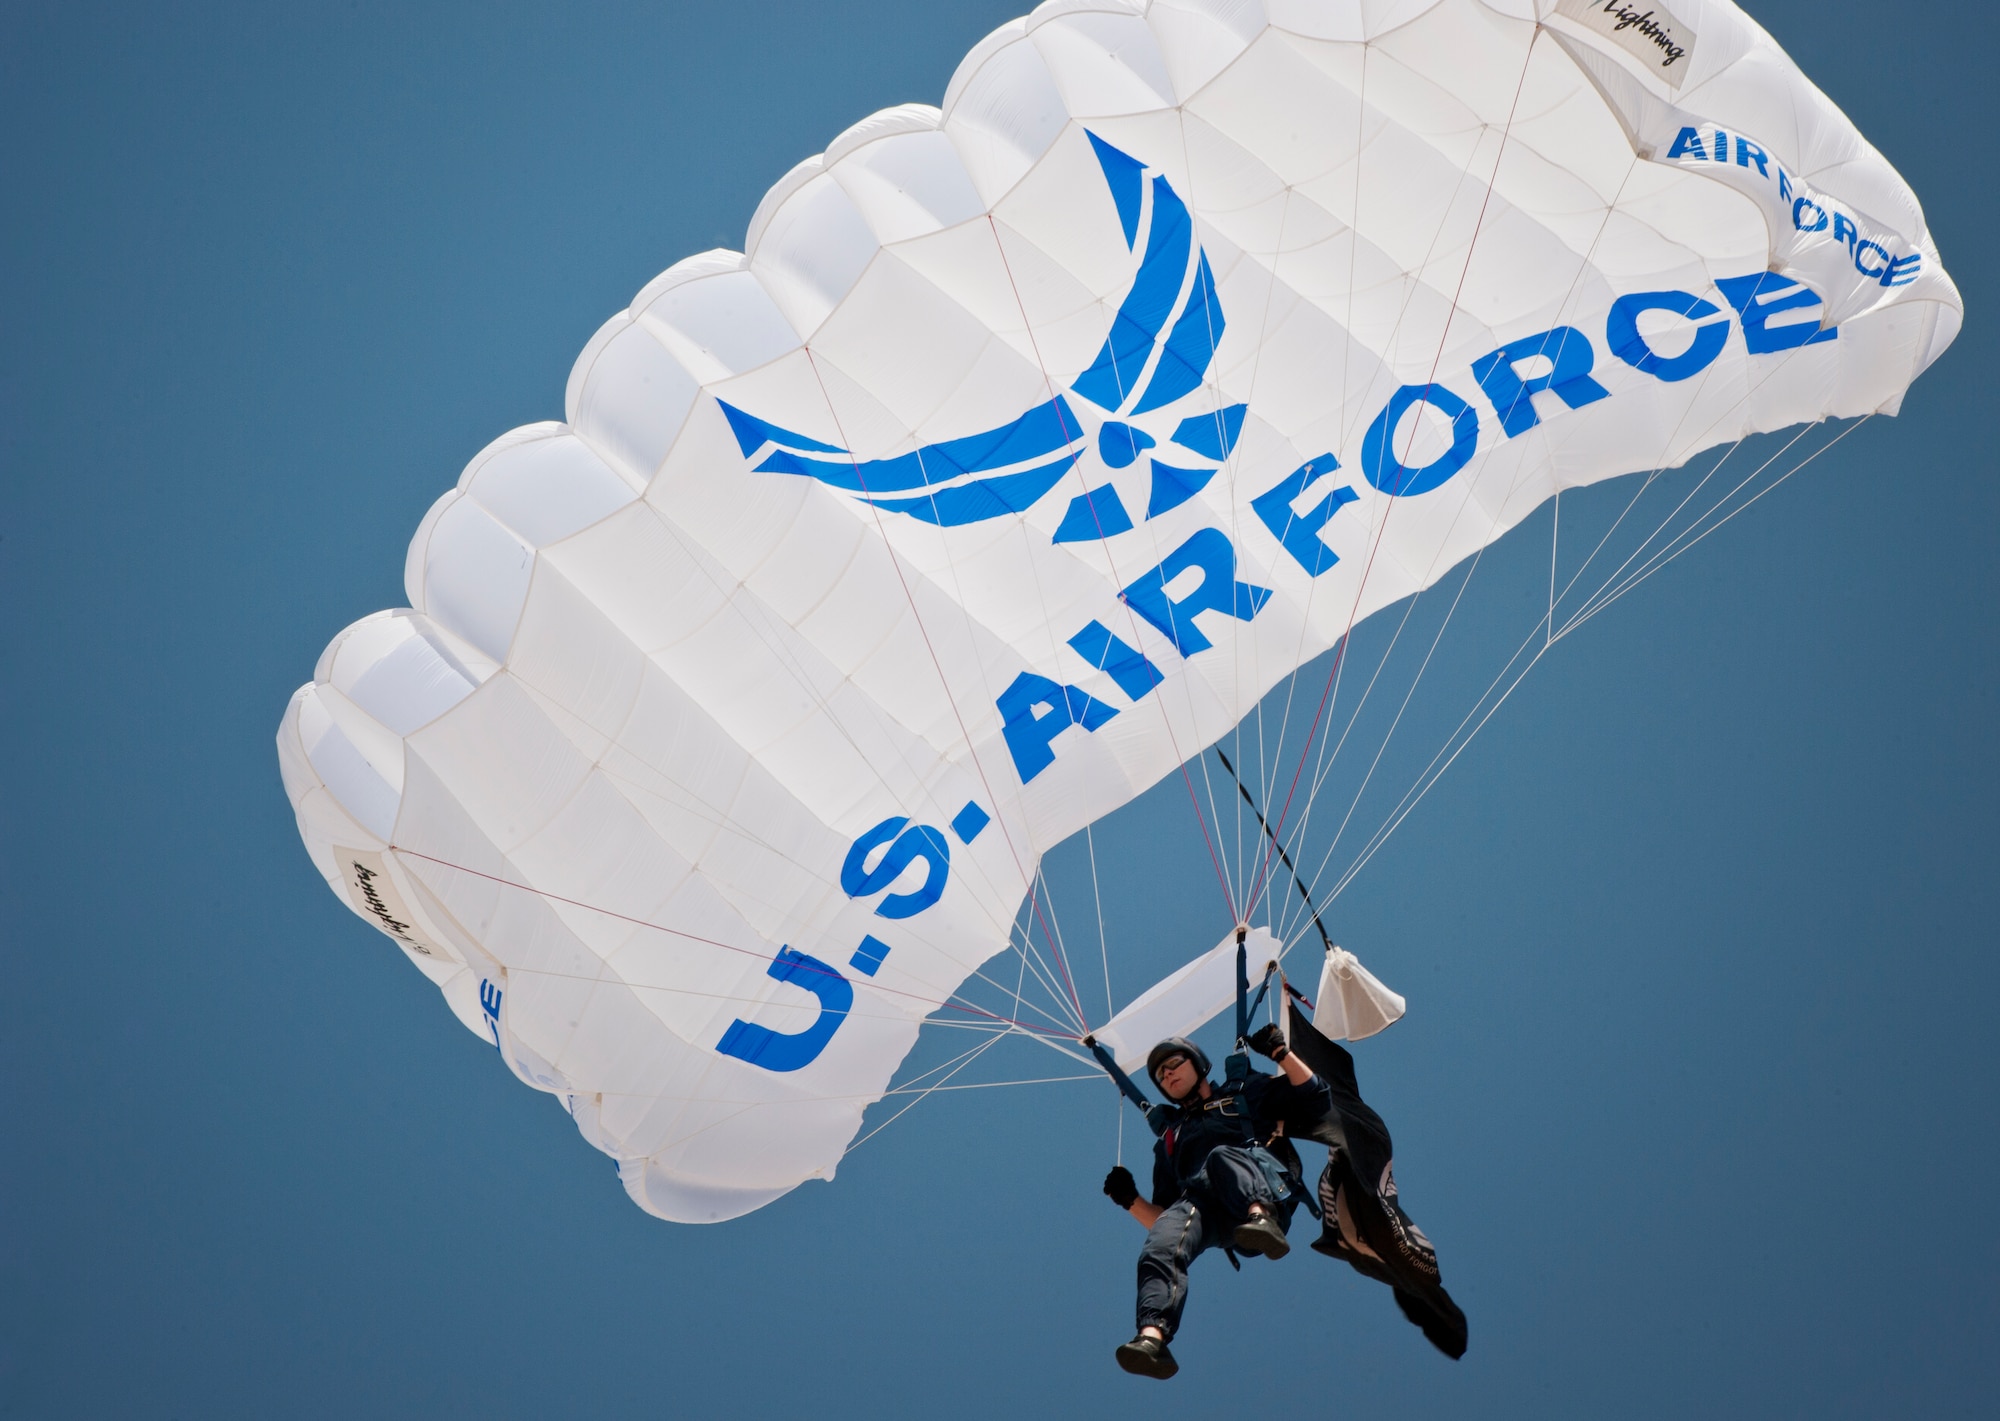 A member of the Air Force Academy Wings of Blue parachute jump team performs during the Dyess Big Country Airfest April 28, 2012, at Dyess Air Force Base, Texas. Along with the performance of Wings of Blue, the airfest also showcased a B-2 Spirit, A-10 Thunderbolt, P-47 Thunderbolt, MiG-17 and many more aircraft. (U.S. Air Force photo by Airman 1st Class Jonathan Stefanko/ Released)